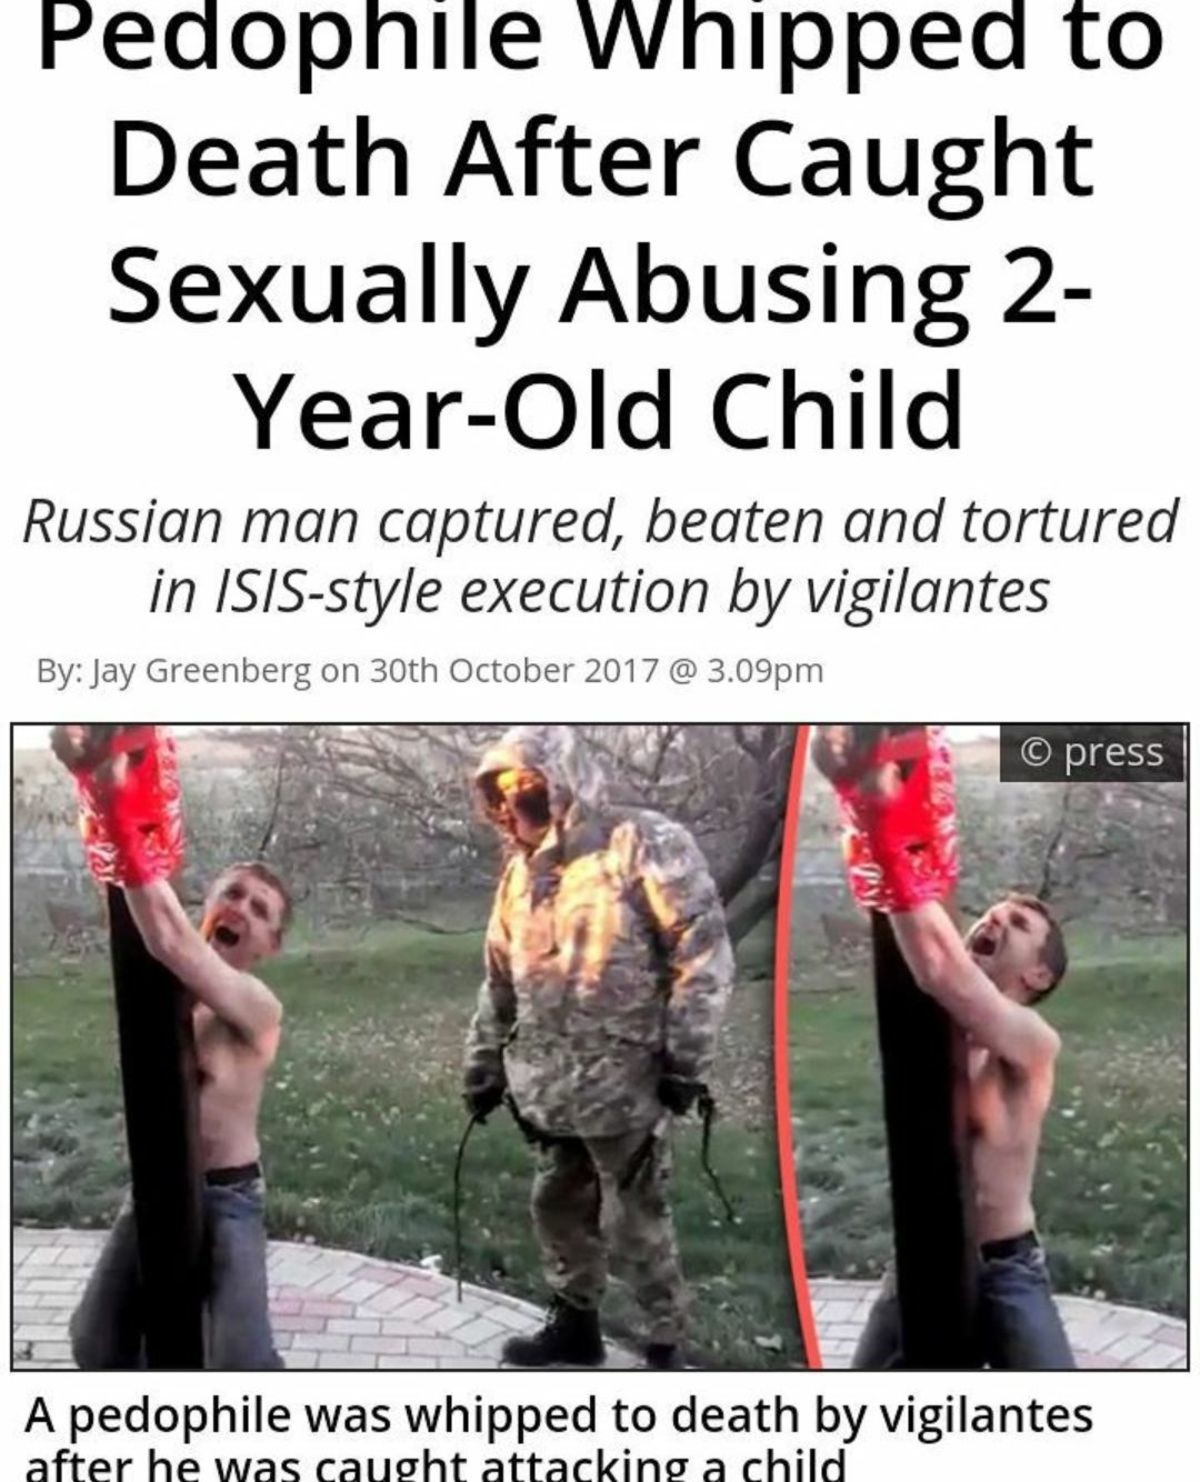 isis style execution. the most whipped man. Pedophile '' ripa" ii! yd to ti' ' uti) ldf t: kiiled Russian man captured, beaten and tortured in execution tty' vi